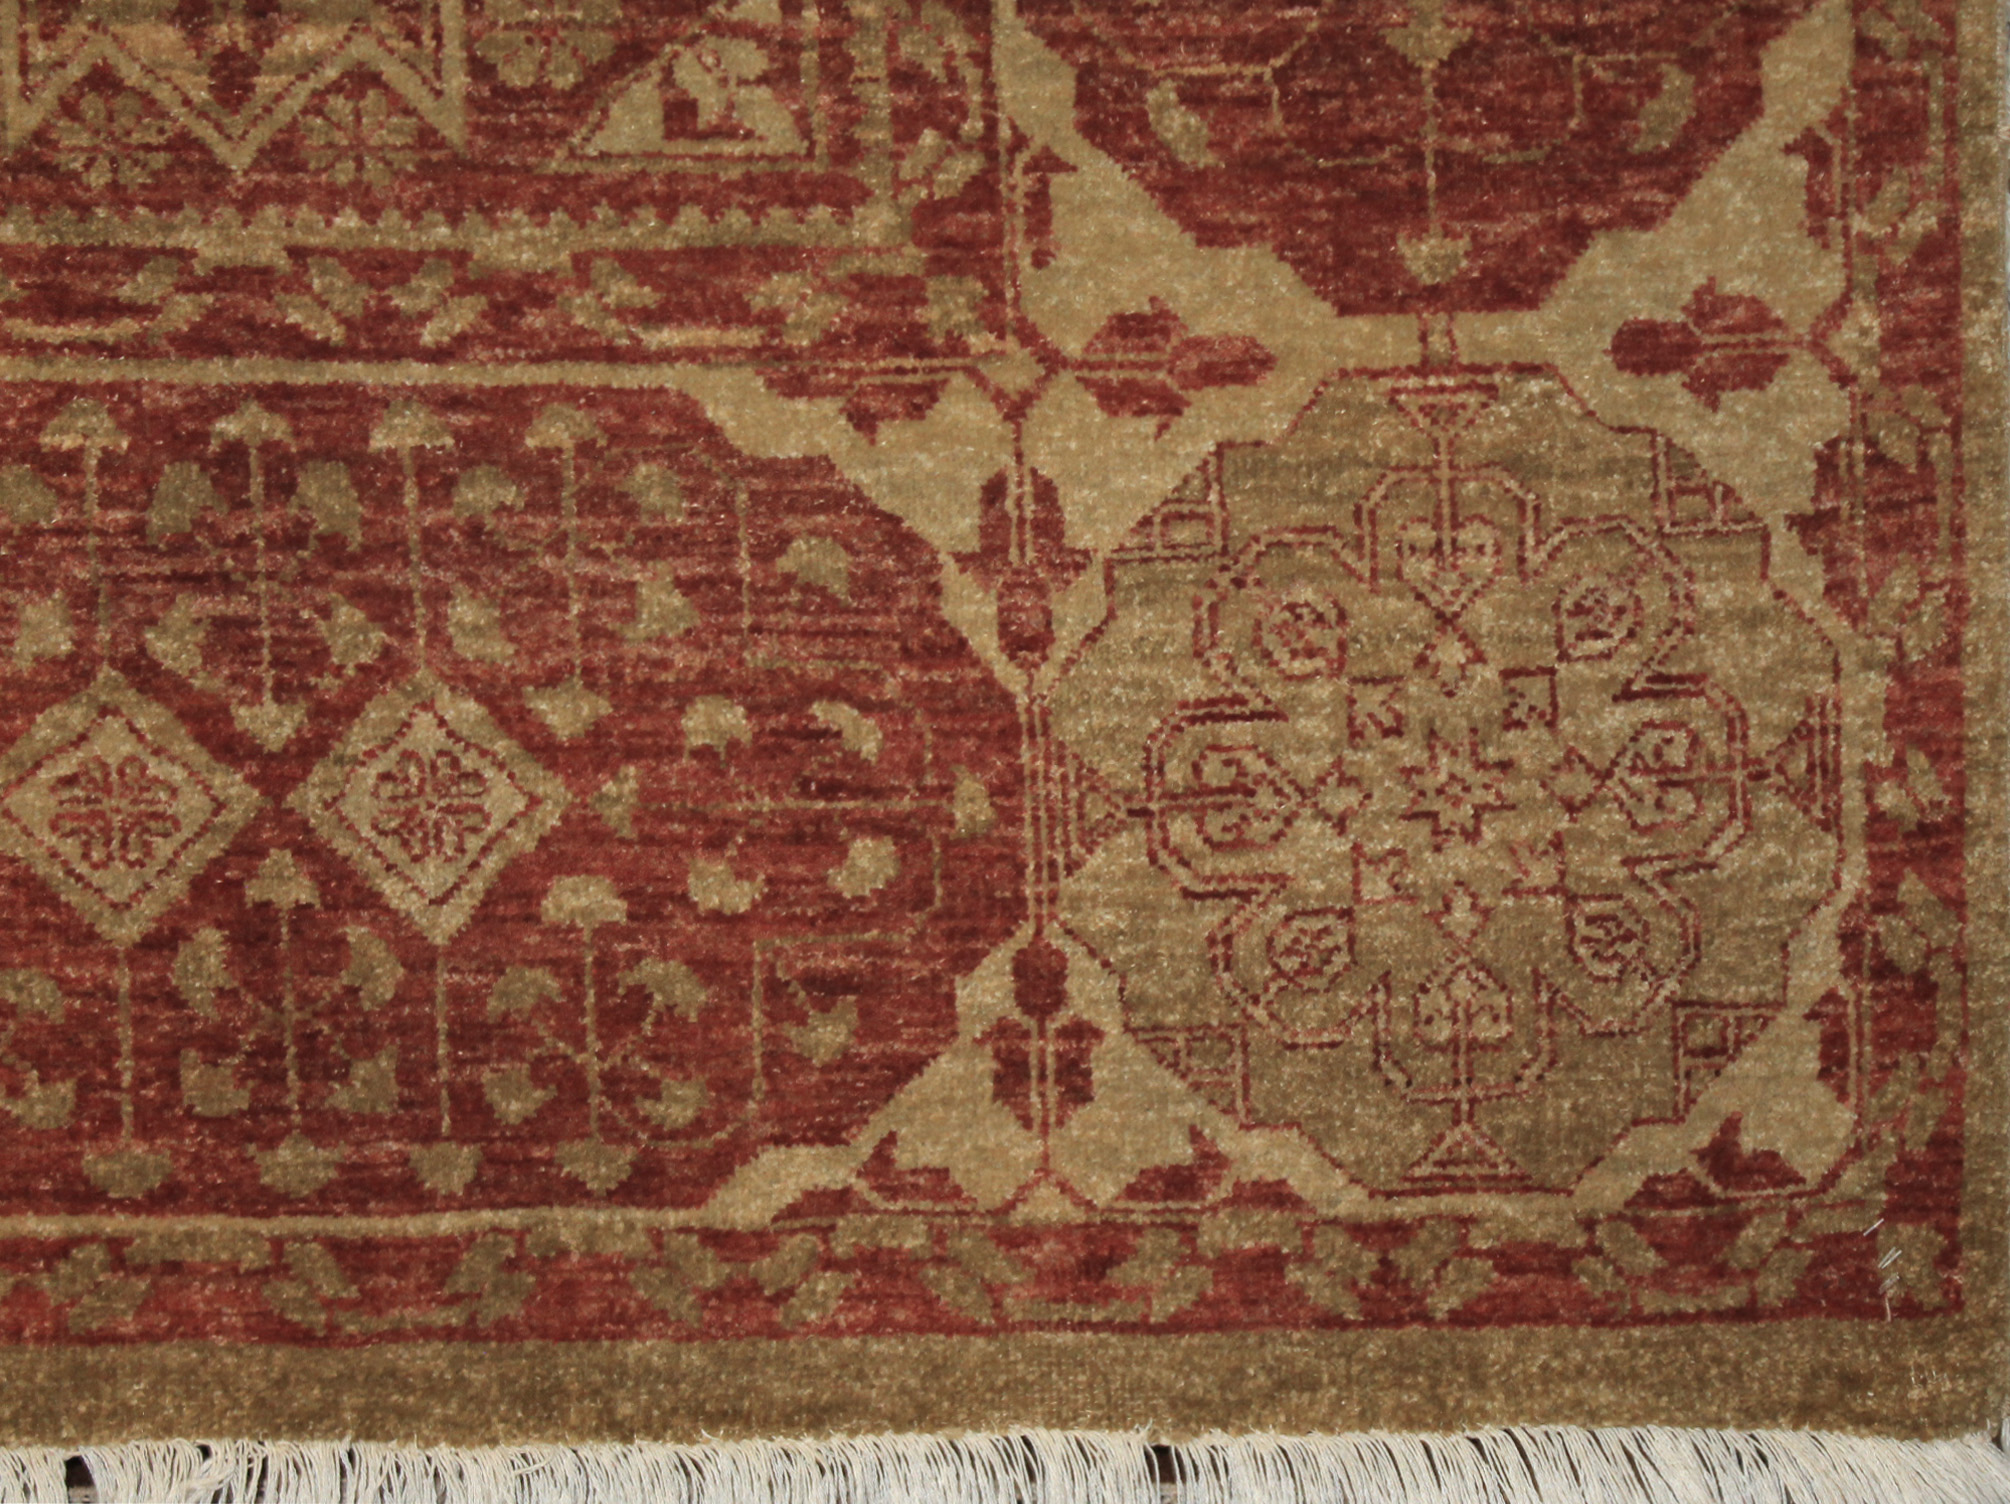 9x12 Antique Revival Hand Knotted Wool Area Rug - MR9034